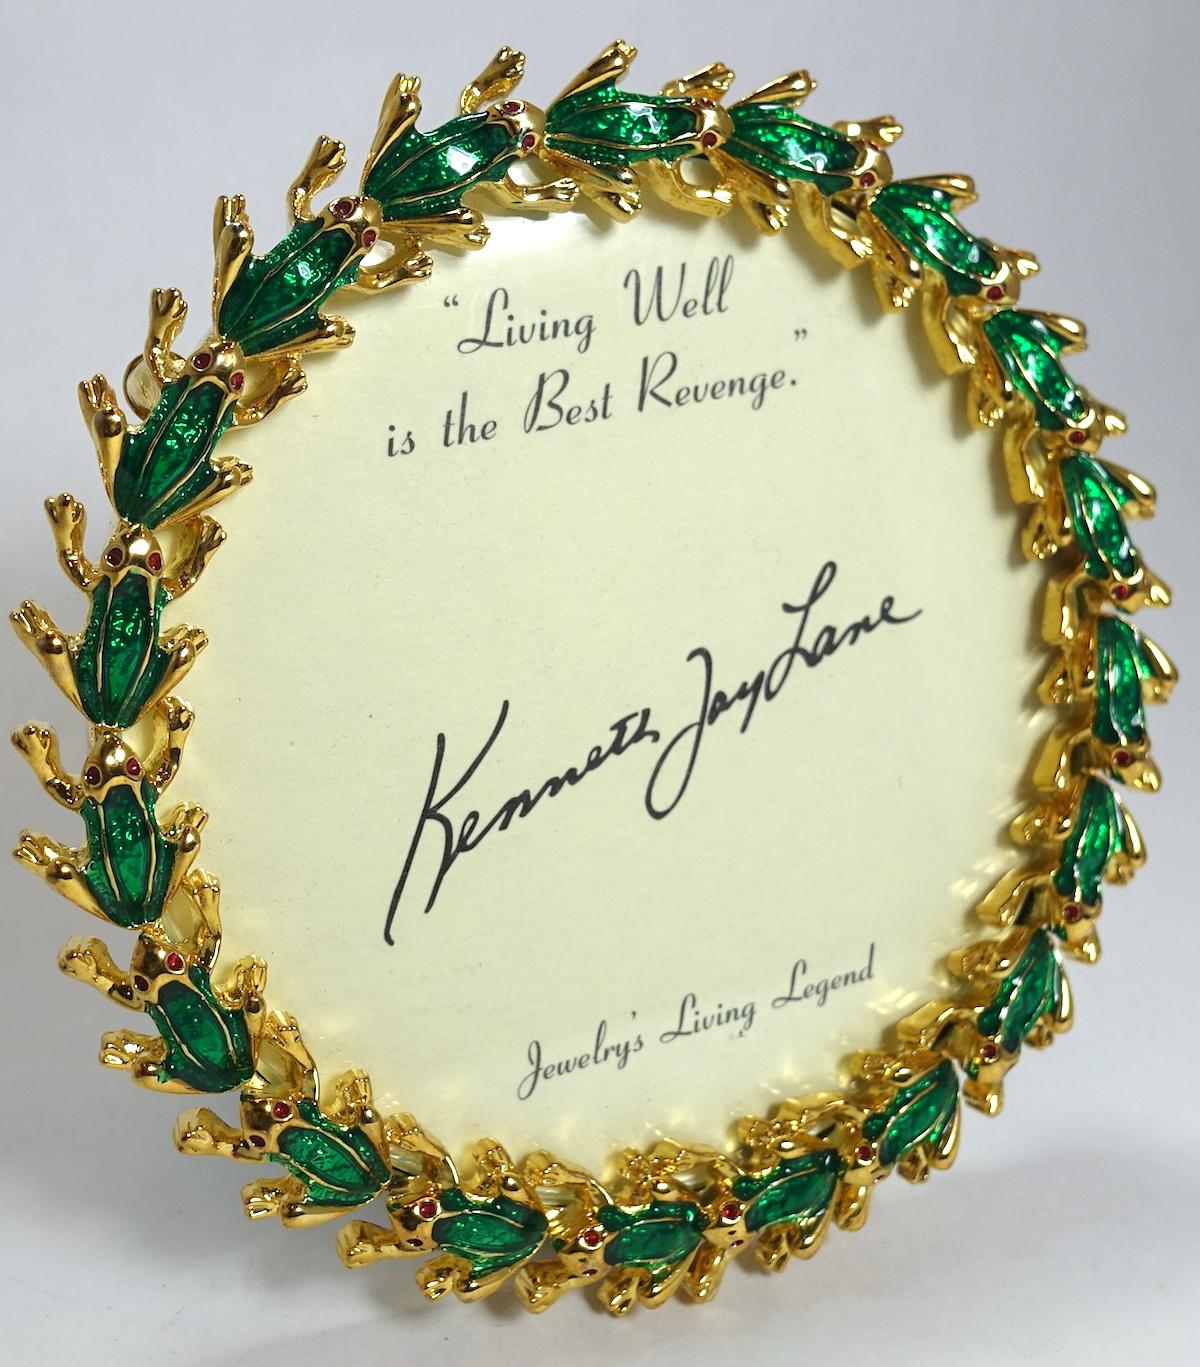 This vintage signed Kenneth Jay Lane photo frame features frogs encircling the frame with green and red enameling on a gold tone setting.  In excellent condition, this frame measures 4-1/4” across; the photo area is 3-1/4” and is signed “Kenneth Jay